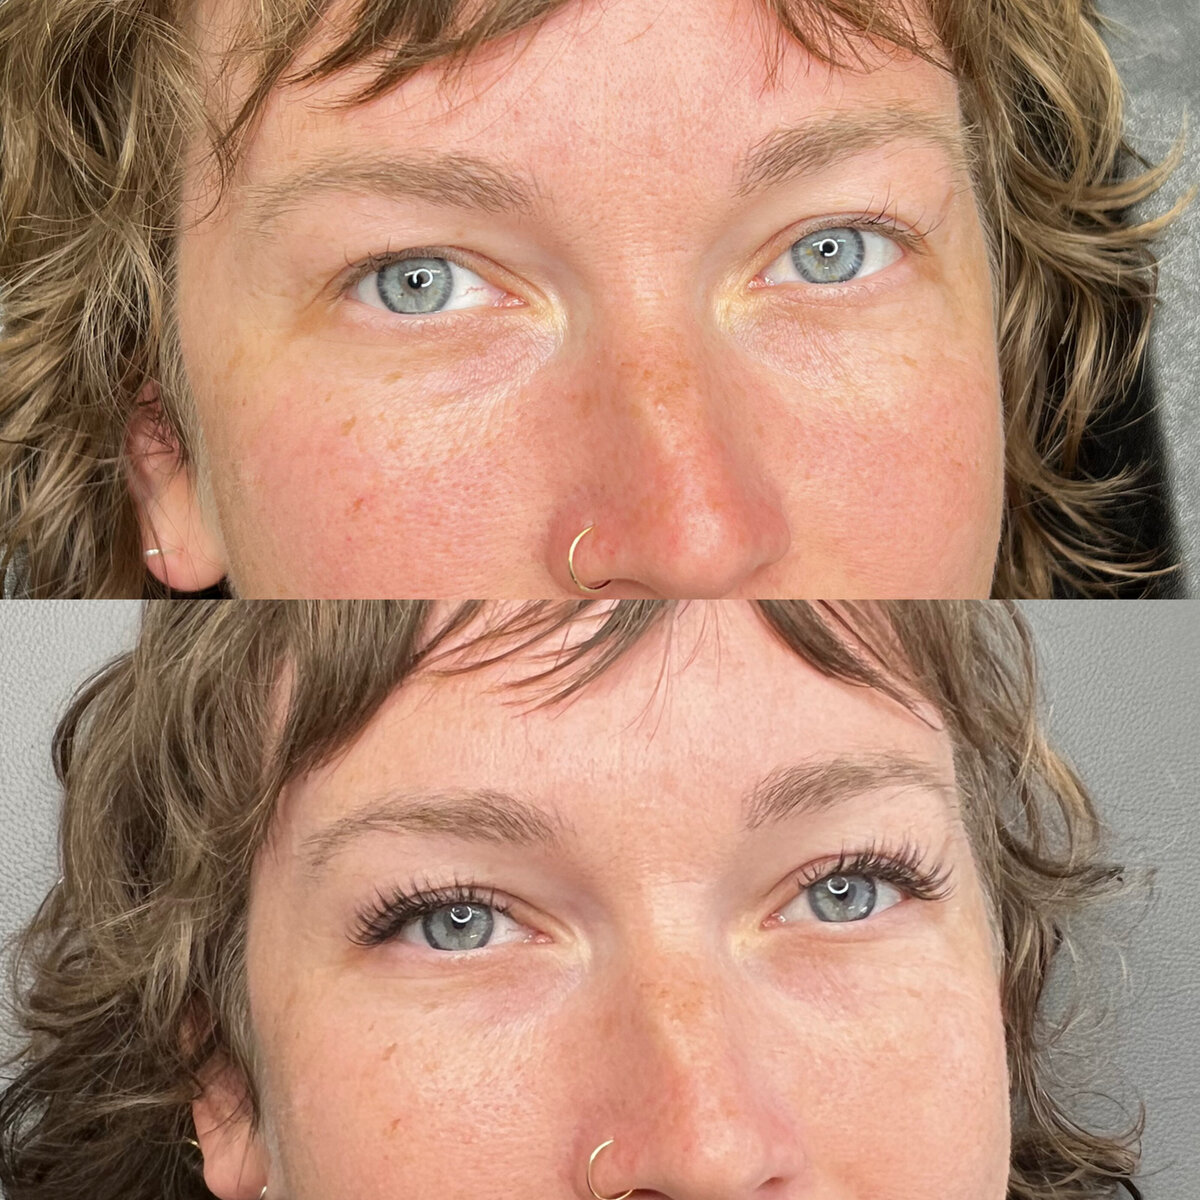 comparison of before and after photos of lash service.